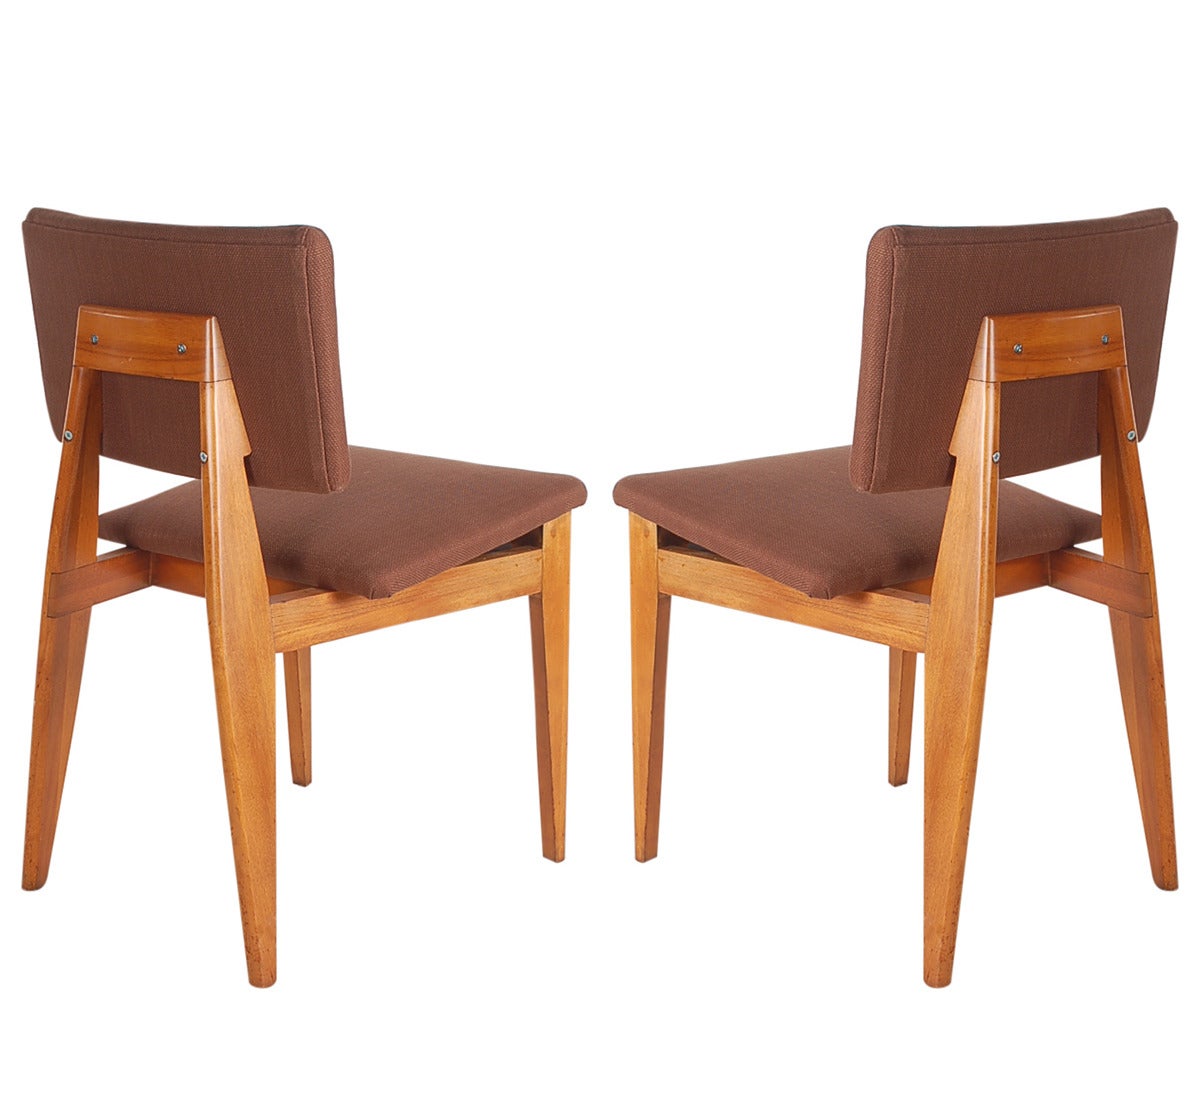 An incredible complete set of eight dining chairs designed by George Nelson for Herman Miller. They features solid maple chair frames with brand new brown tweed upholstery.